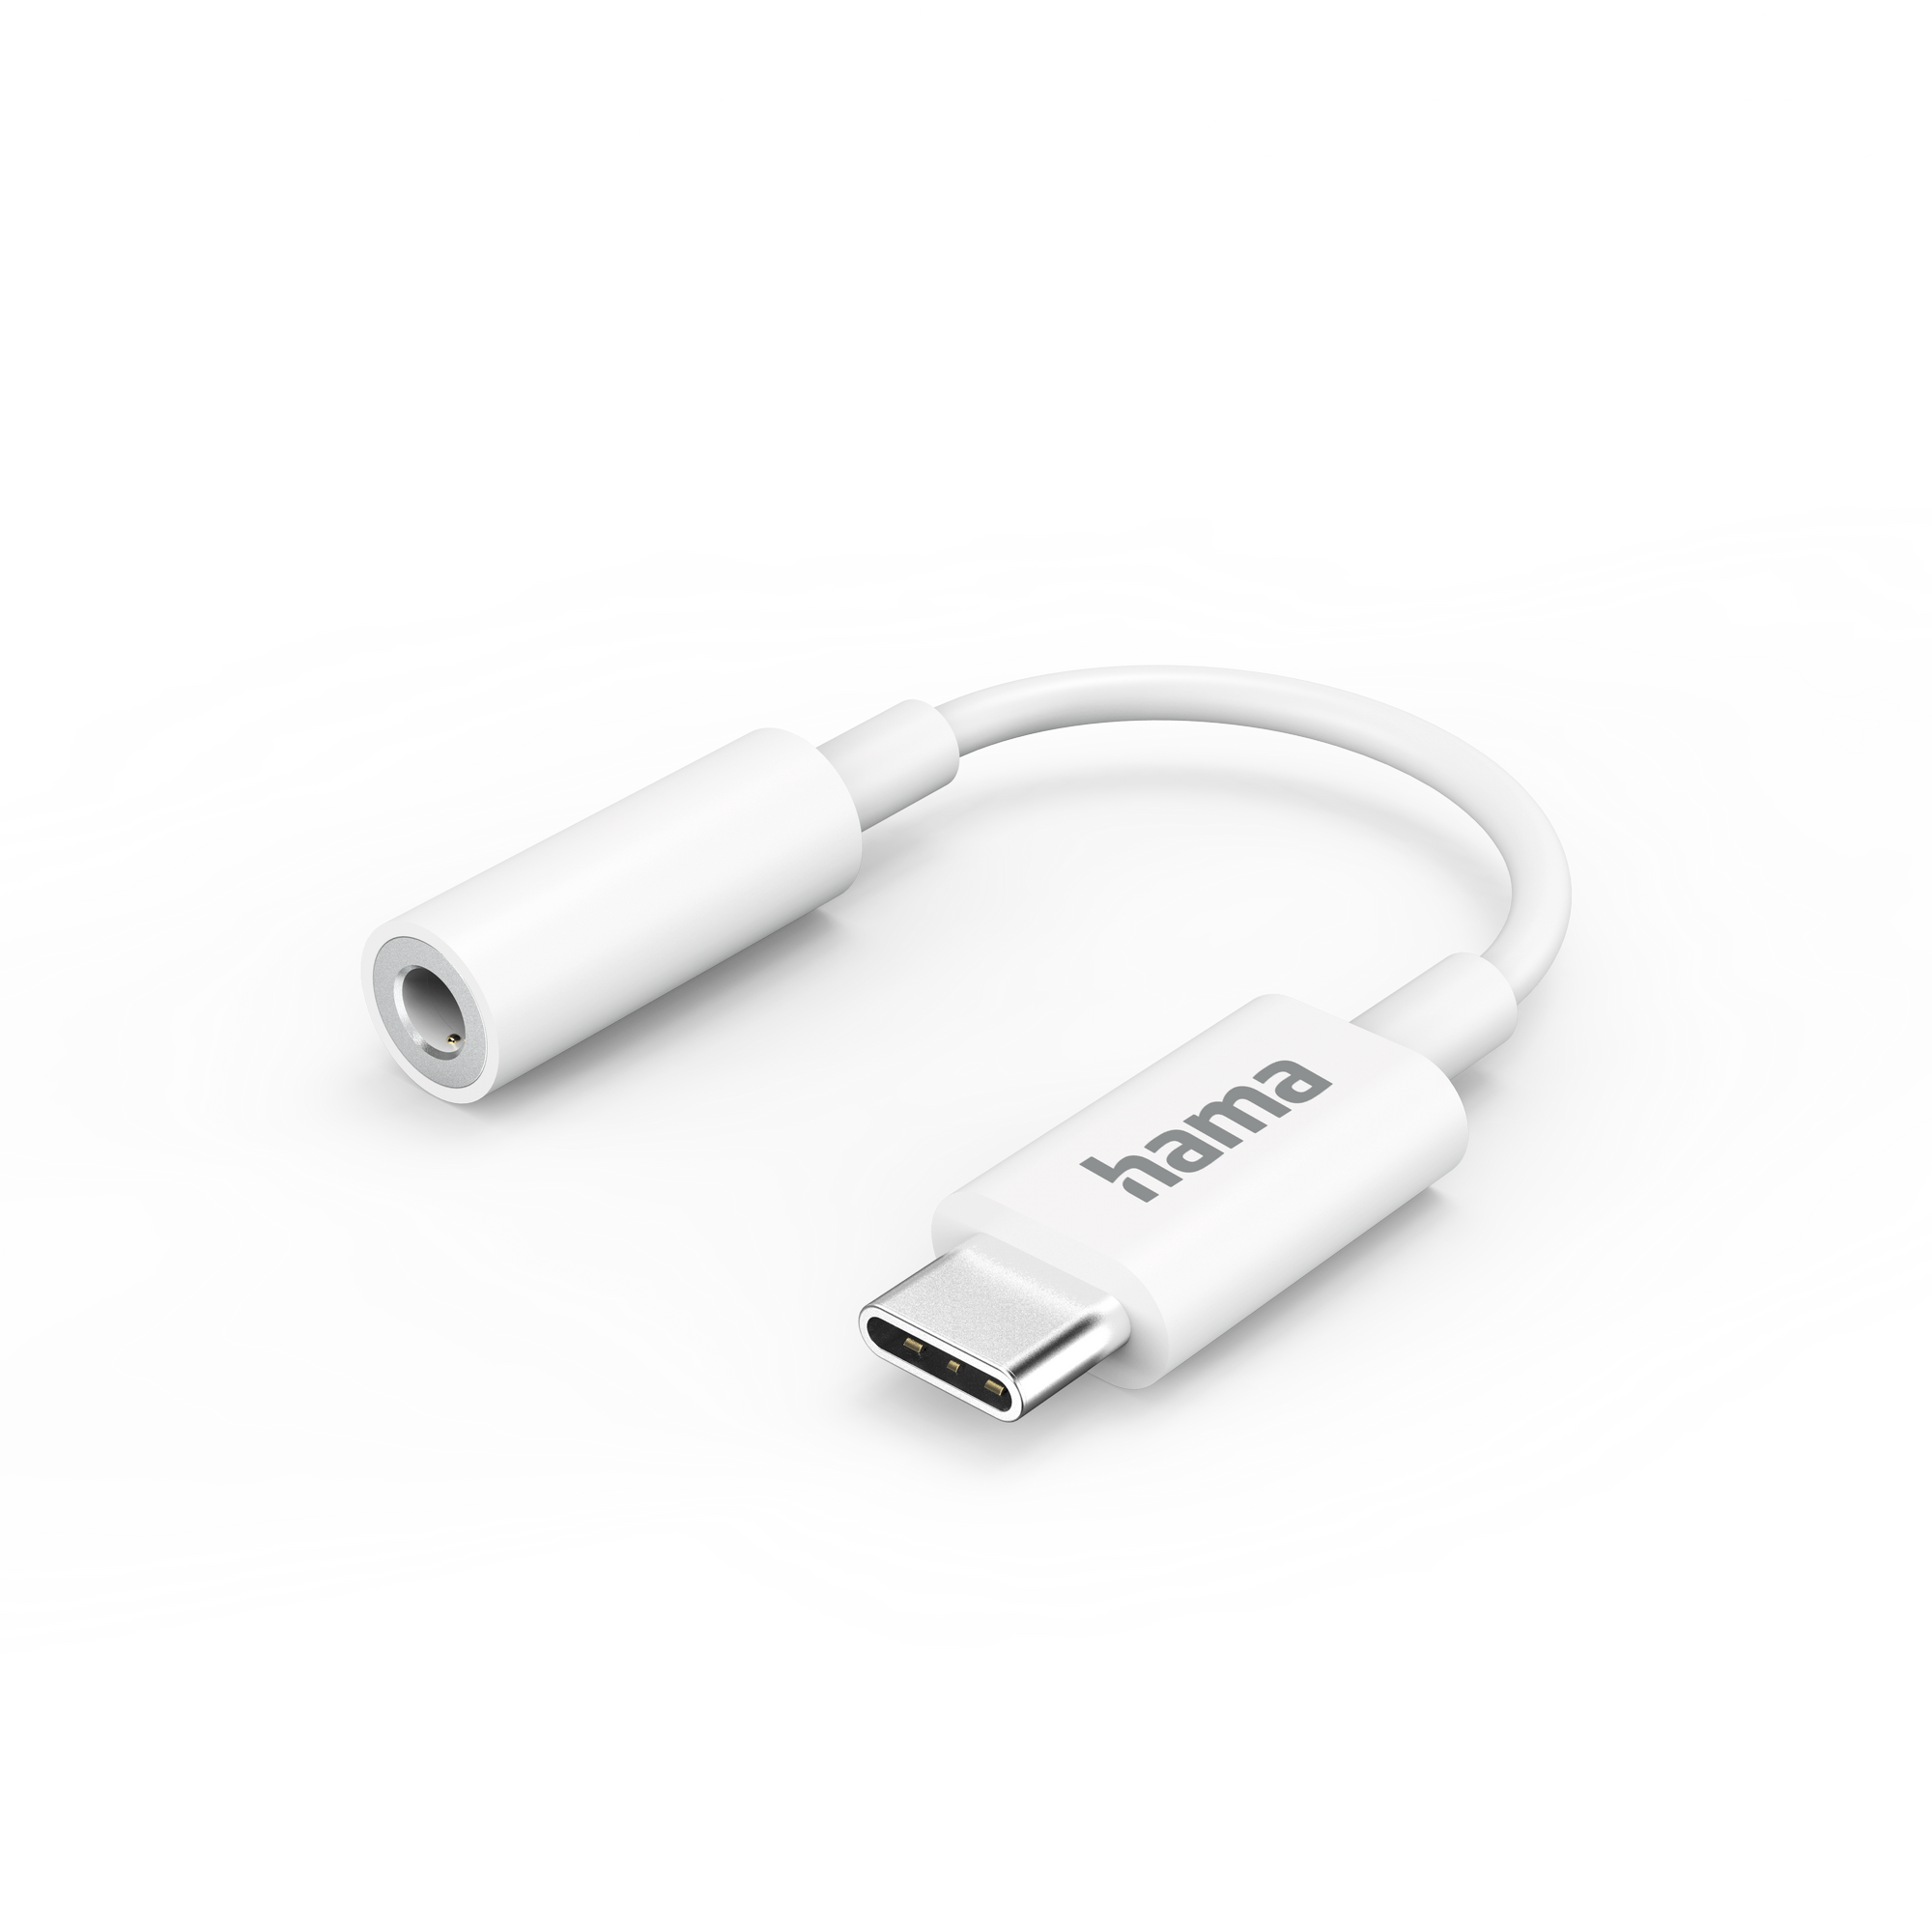 USB-C-Adapter mit 3,5 mm Audiobuchse weiß + product picture